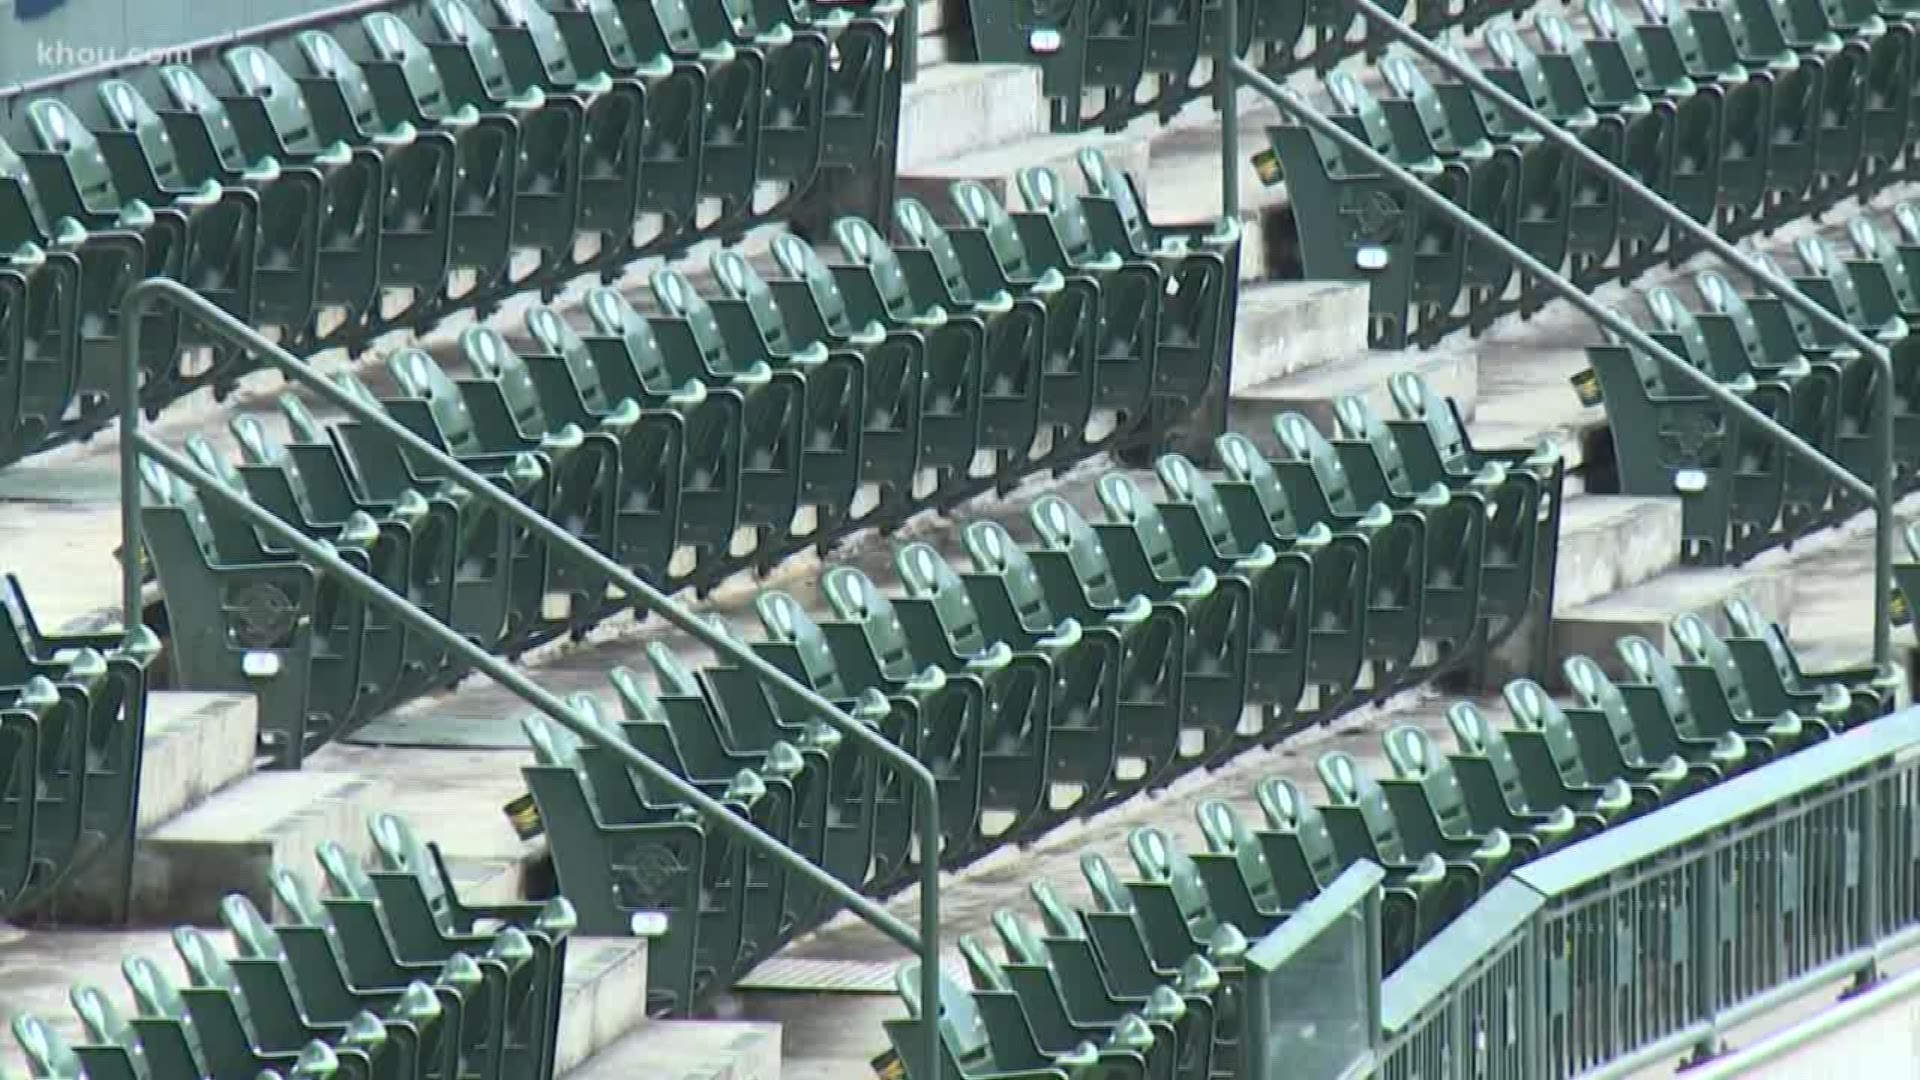 Astros fans ready to bring home seats from Minute Maid Park